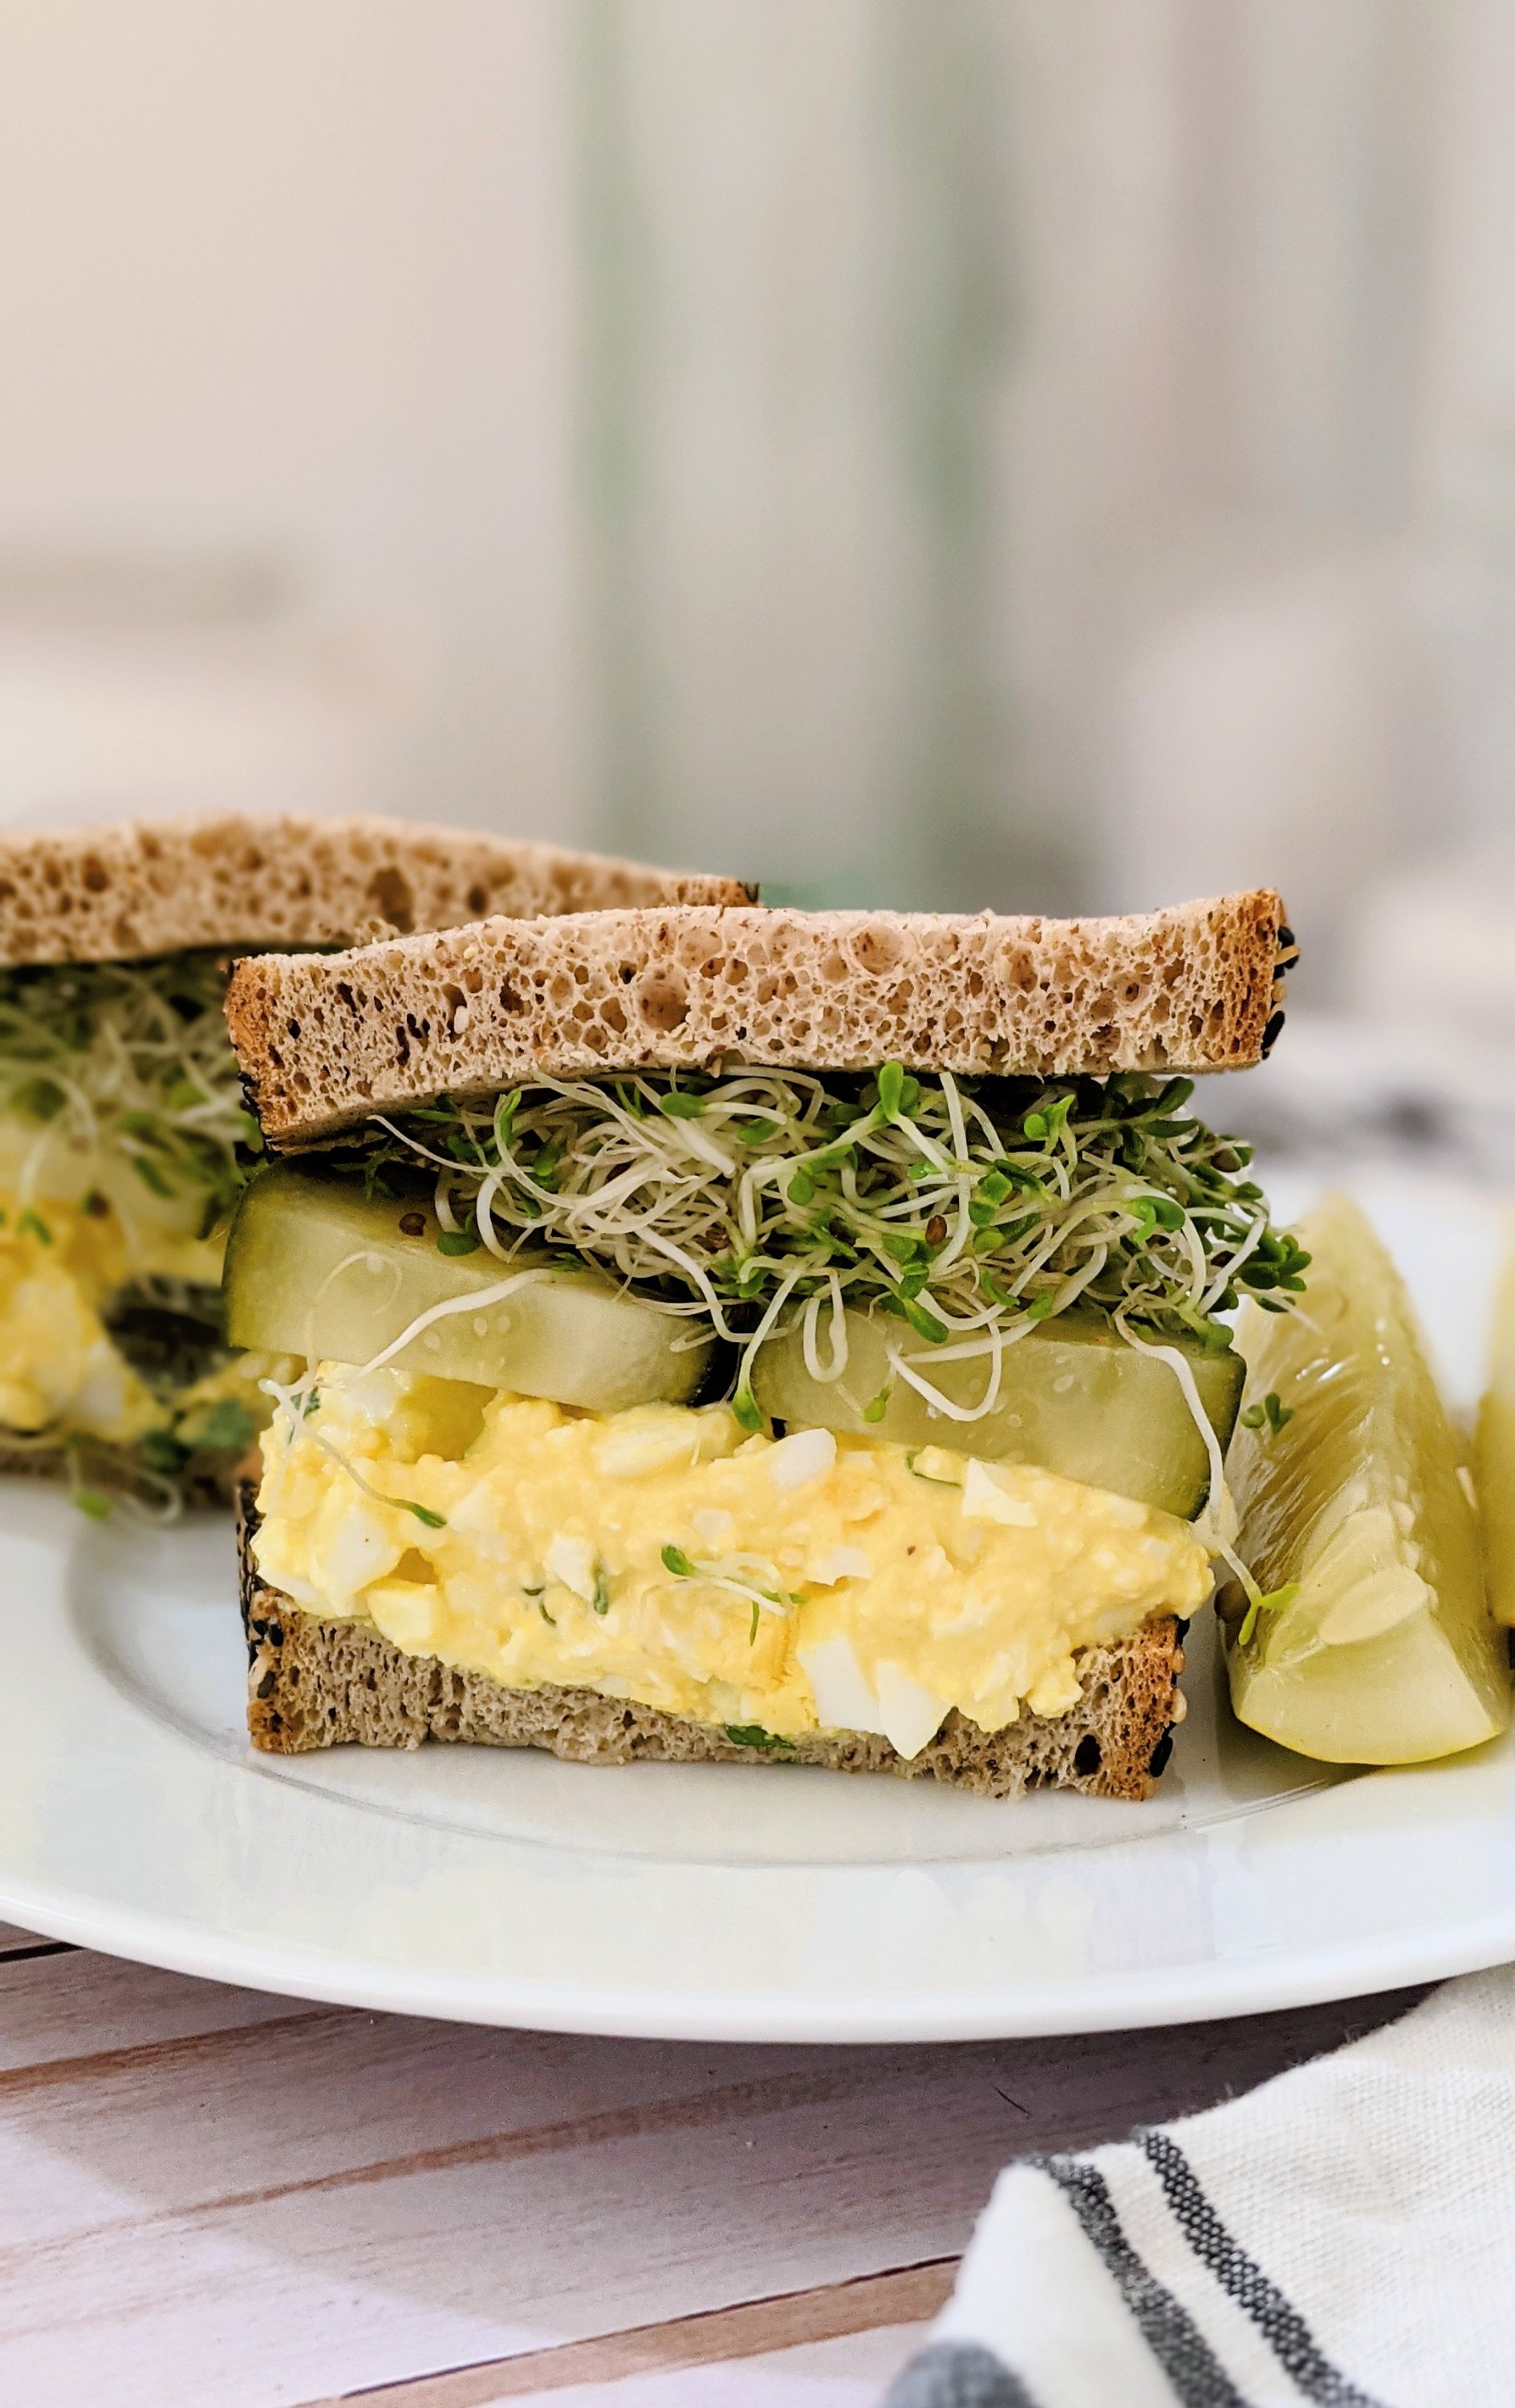 egg salad with pickles and sprouts dill pickle egg salad recipe keto low carb plant based lunches high protein high fiber sandwiches low carb